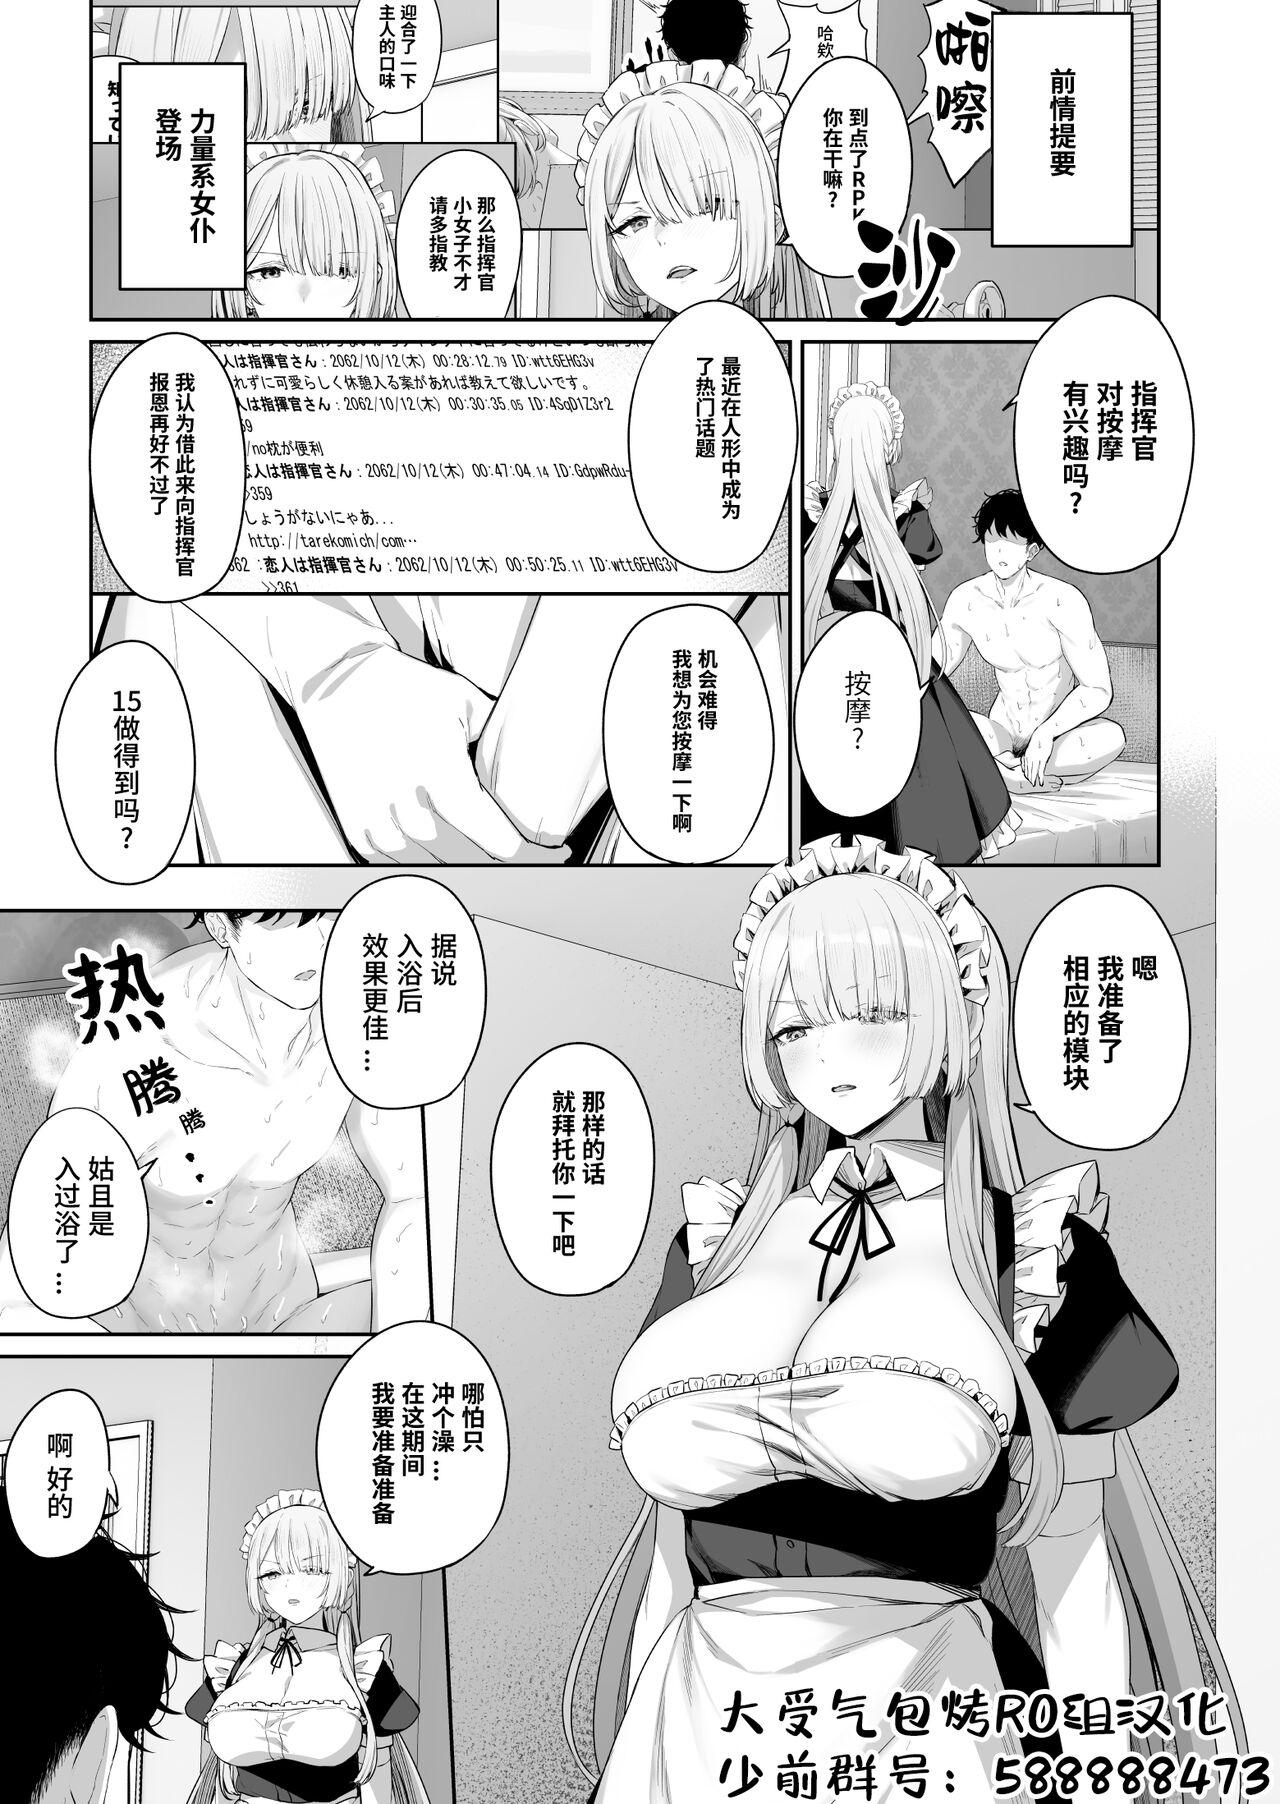 Price AK15の進捗1 - Girls frontline Massages - Picture 1